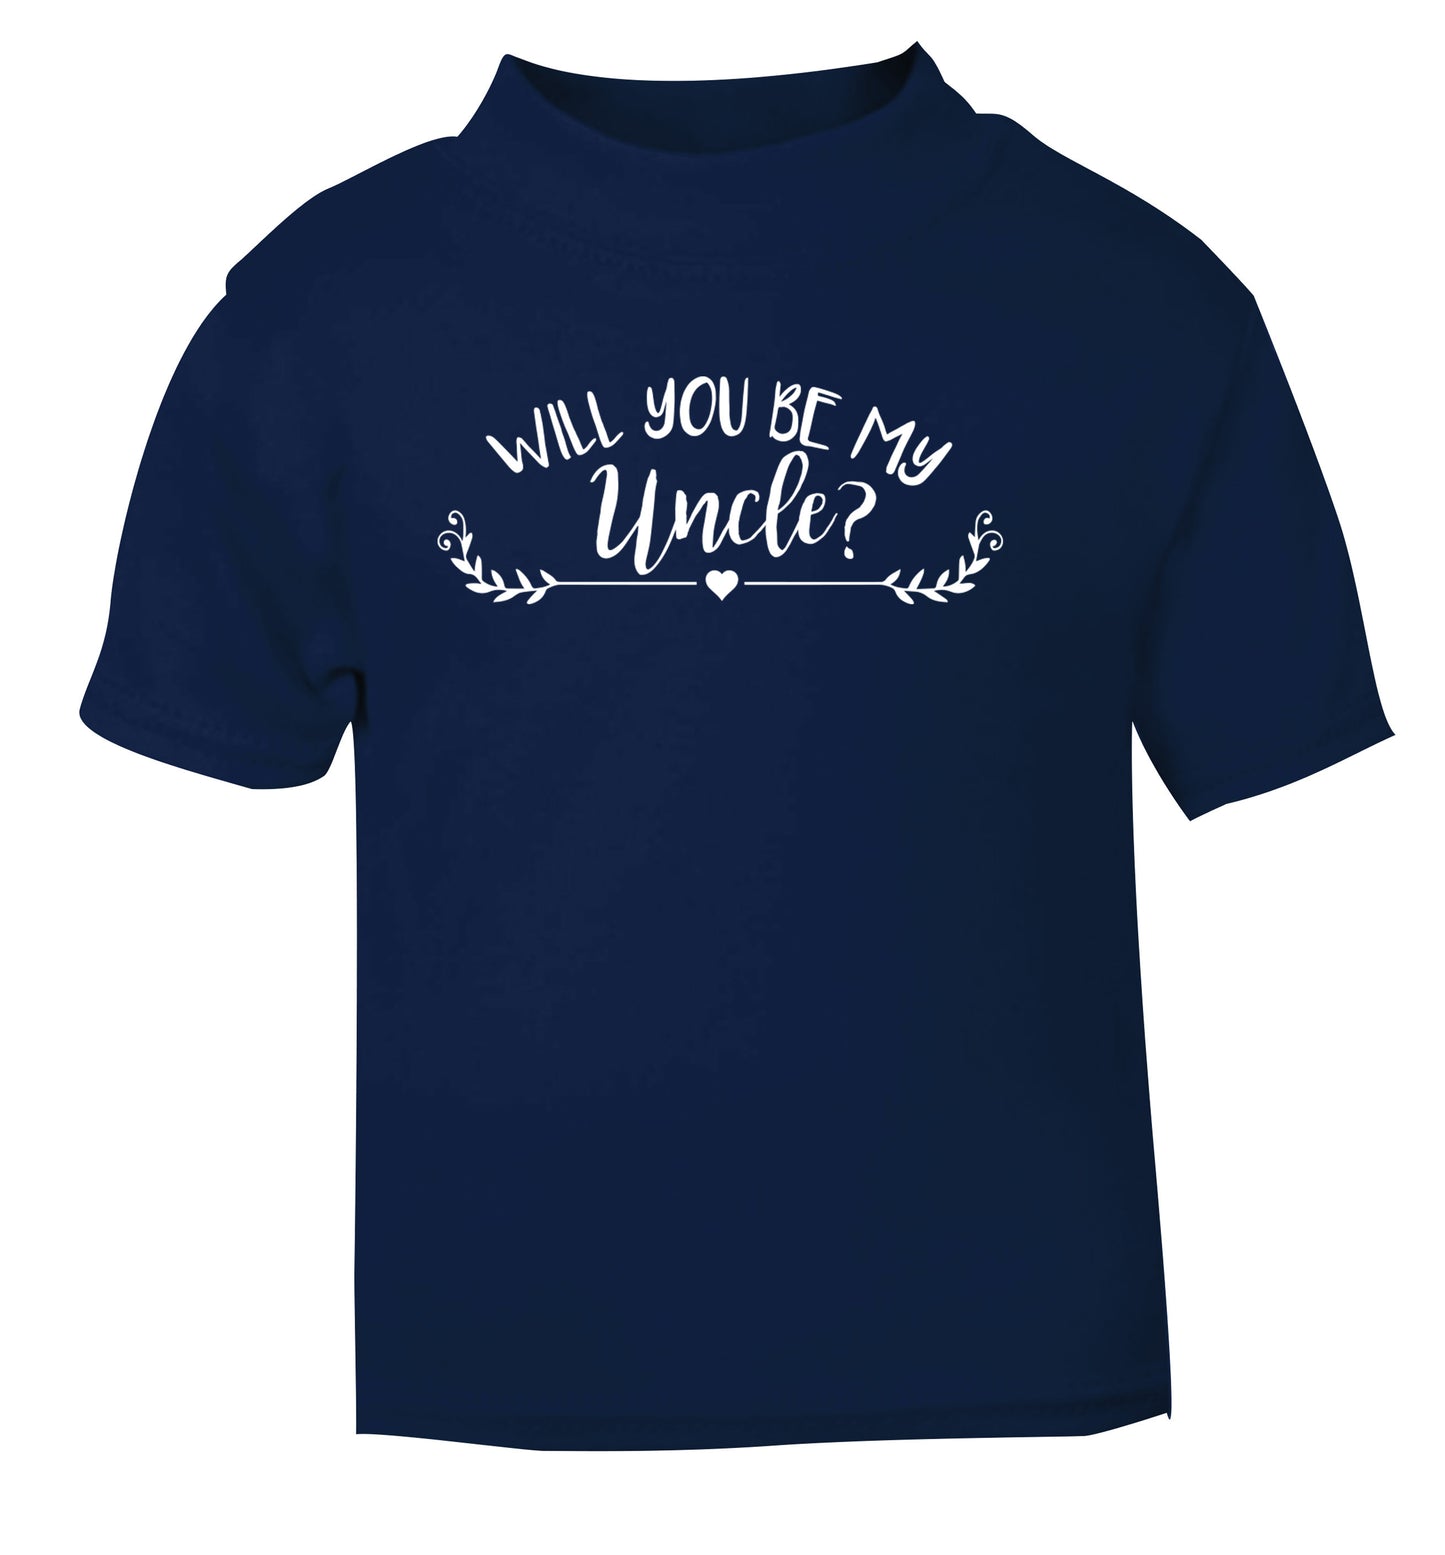 Will you be my uncle? navy Baby Toddler Tshirt 2 Years